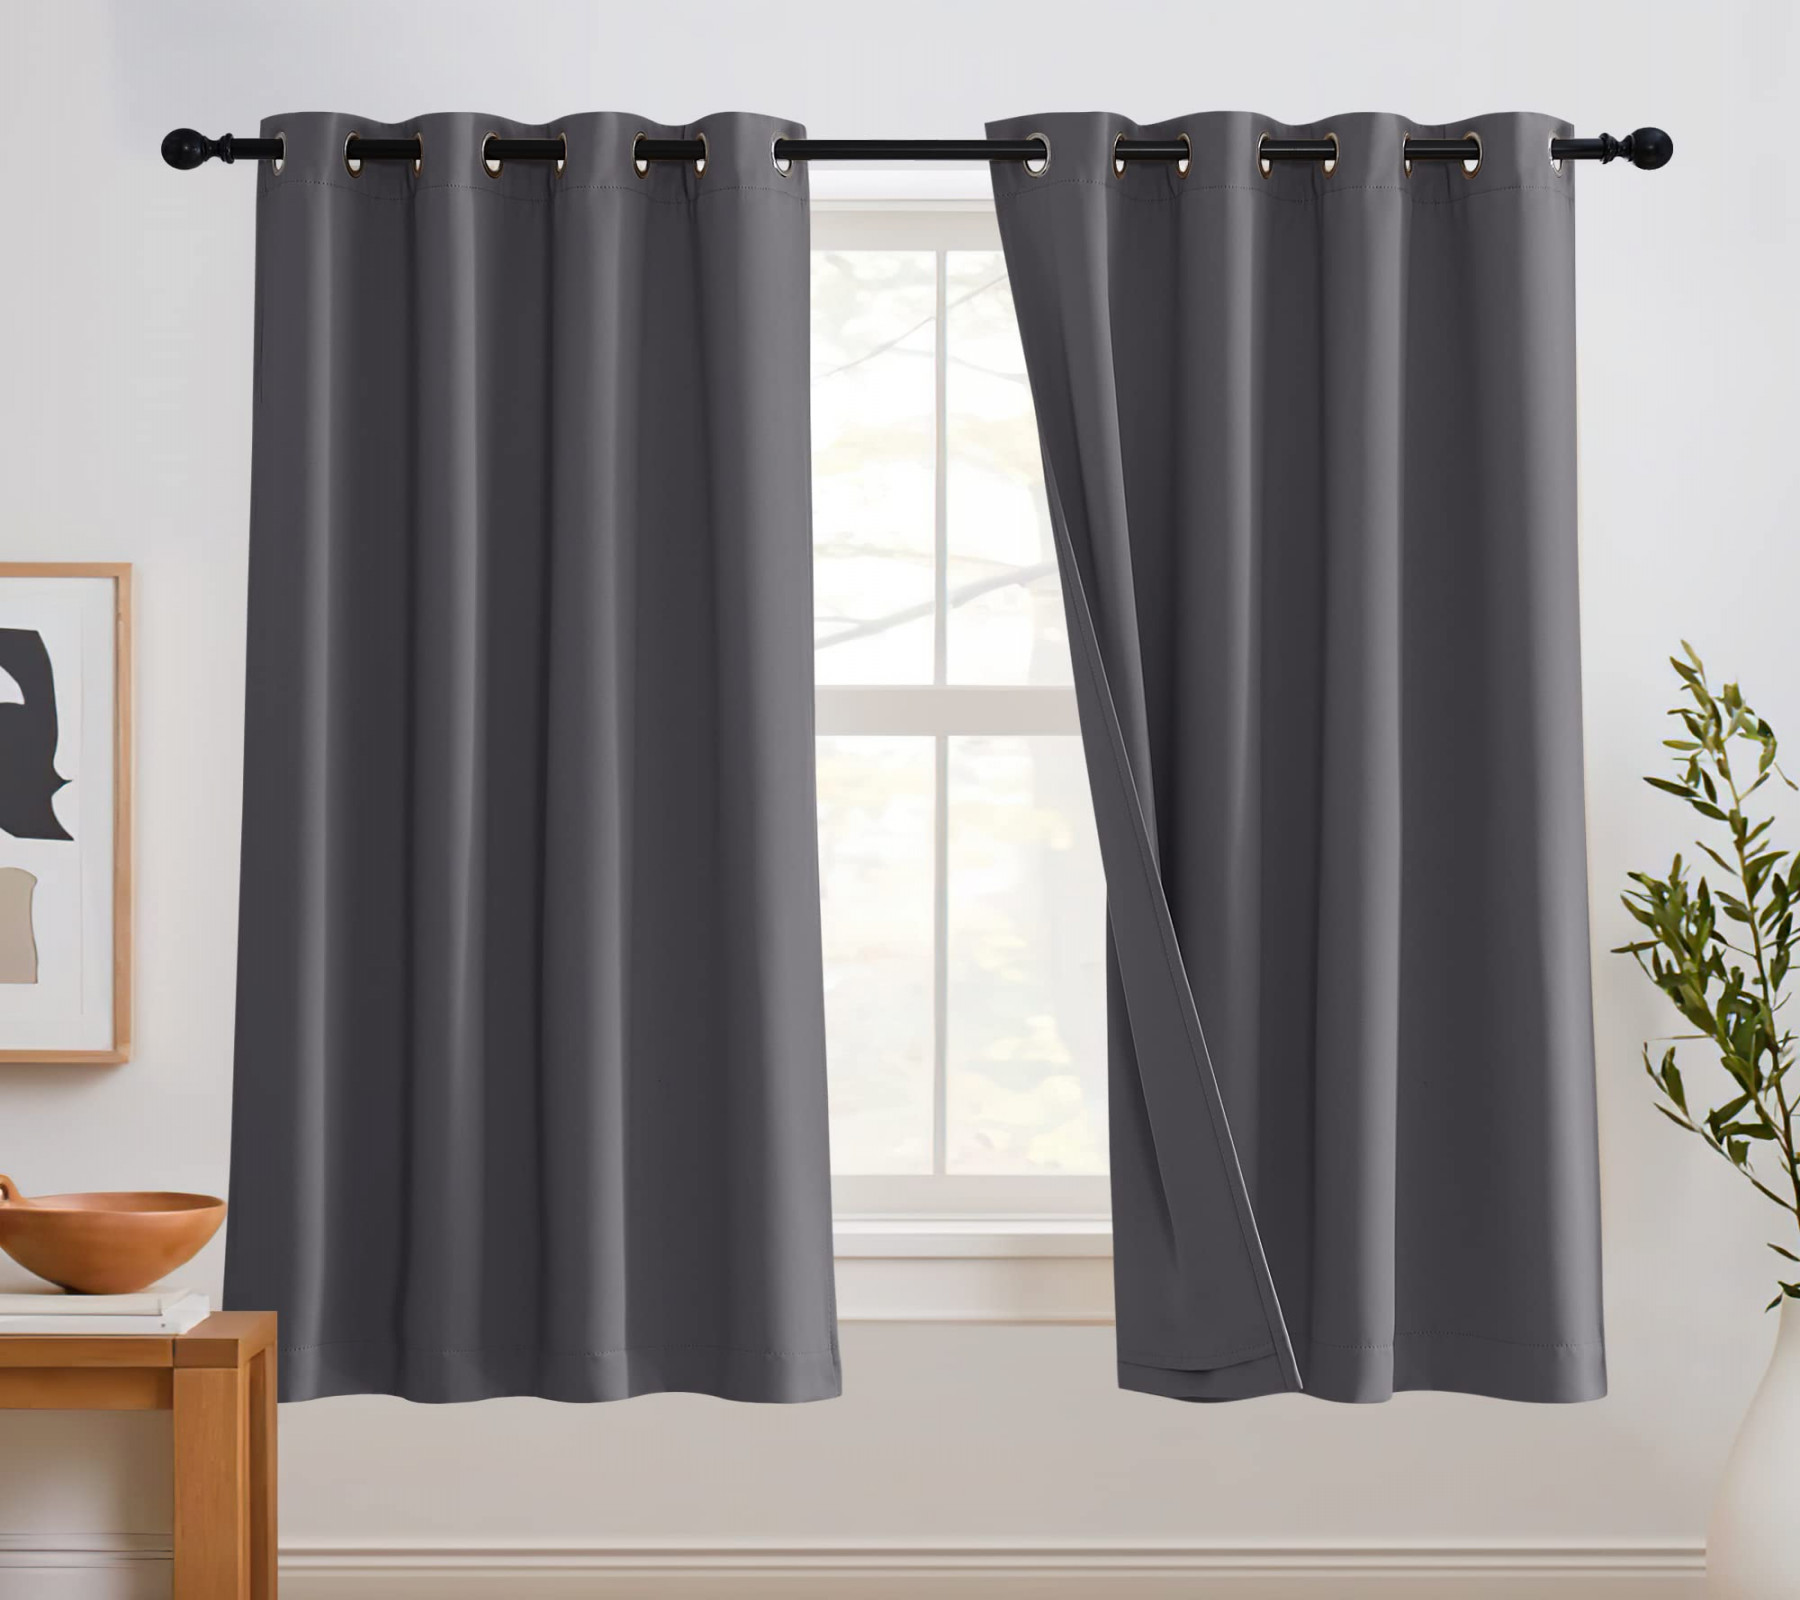 RYB HOME Noise Cancelling Curtains -  Layers Total Blackout Curtains  Grommet Heavy Duty Drapes Thermal Insulated Energy Efficiency for Kids Room